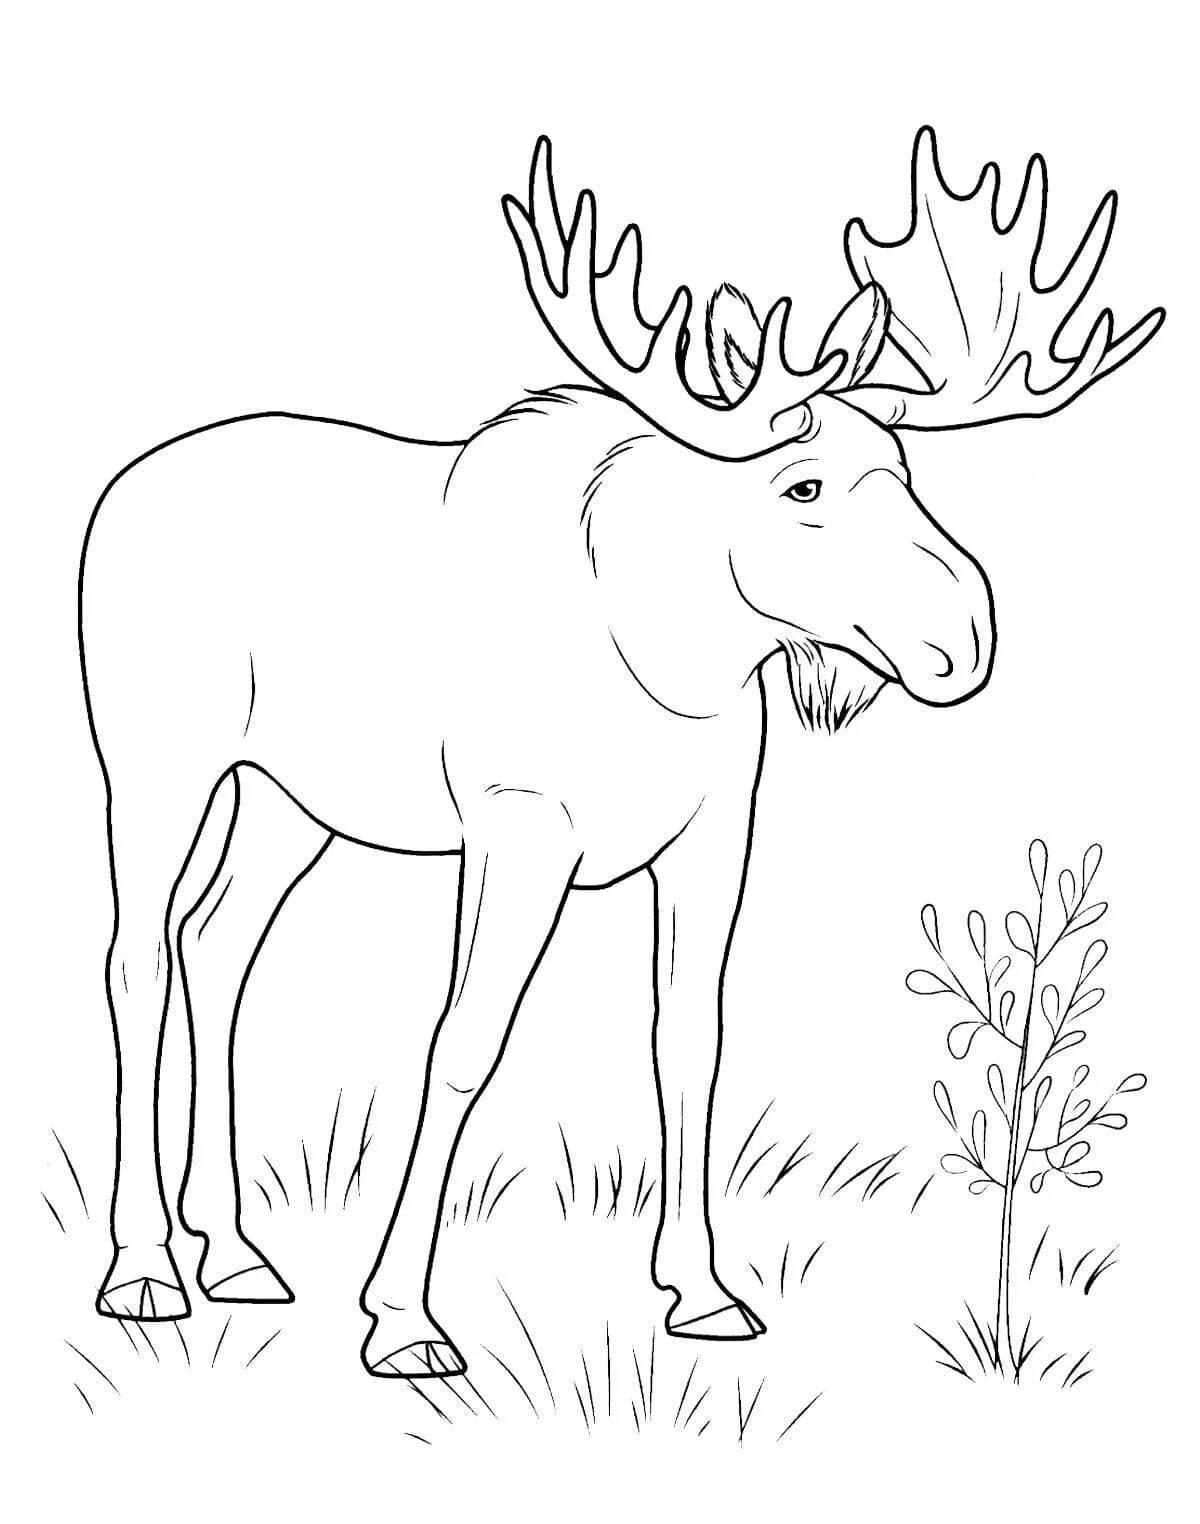 Exquisite wild animal coloring page for kids